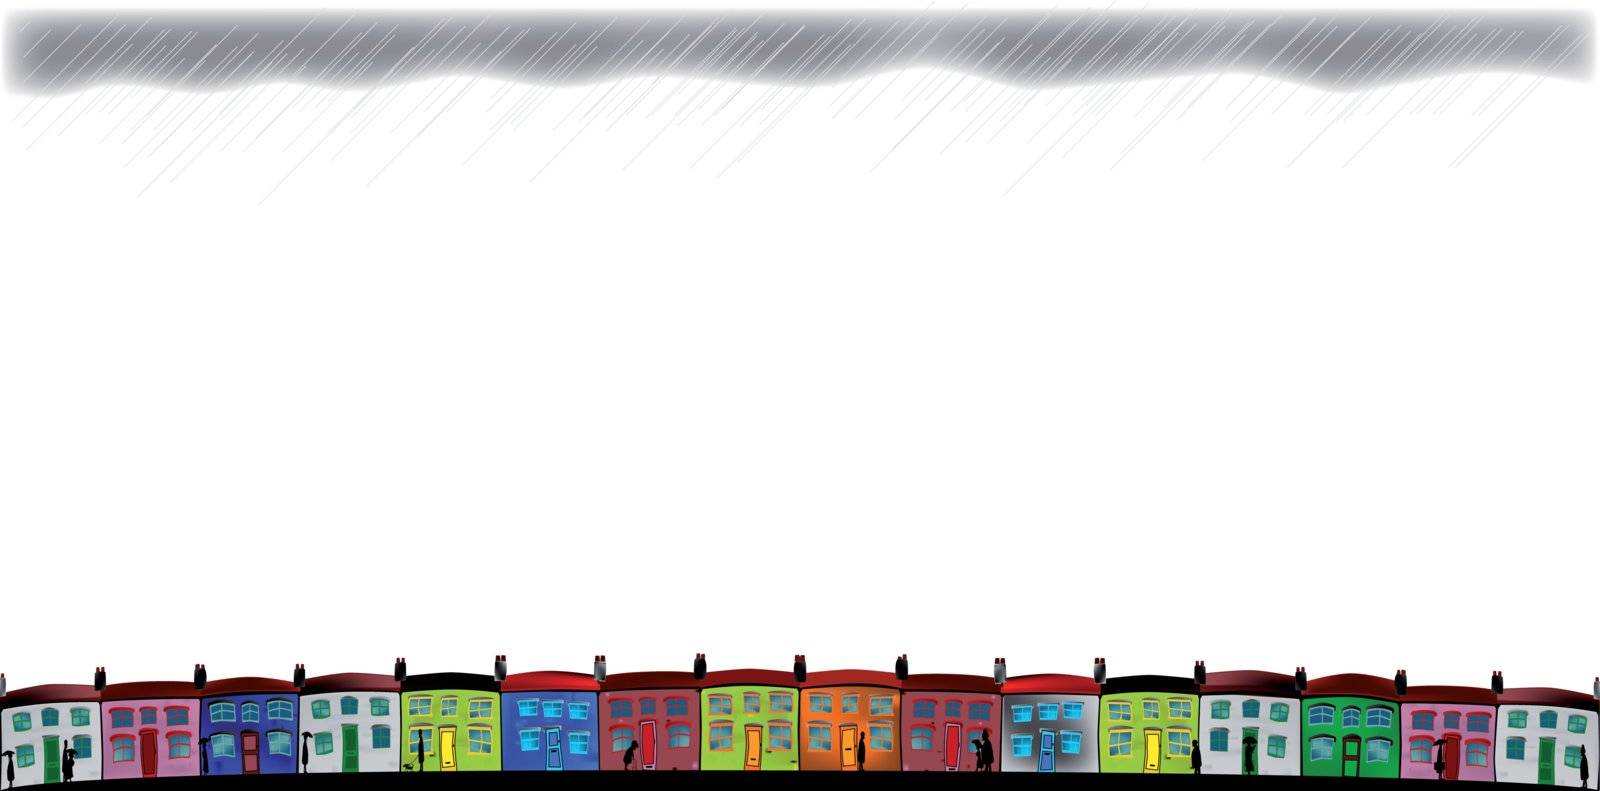 A row of colorful, neat cottages with several people scurrying about trying to get out of the rain.